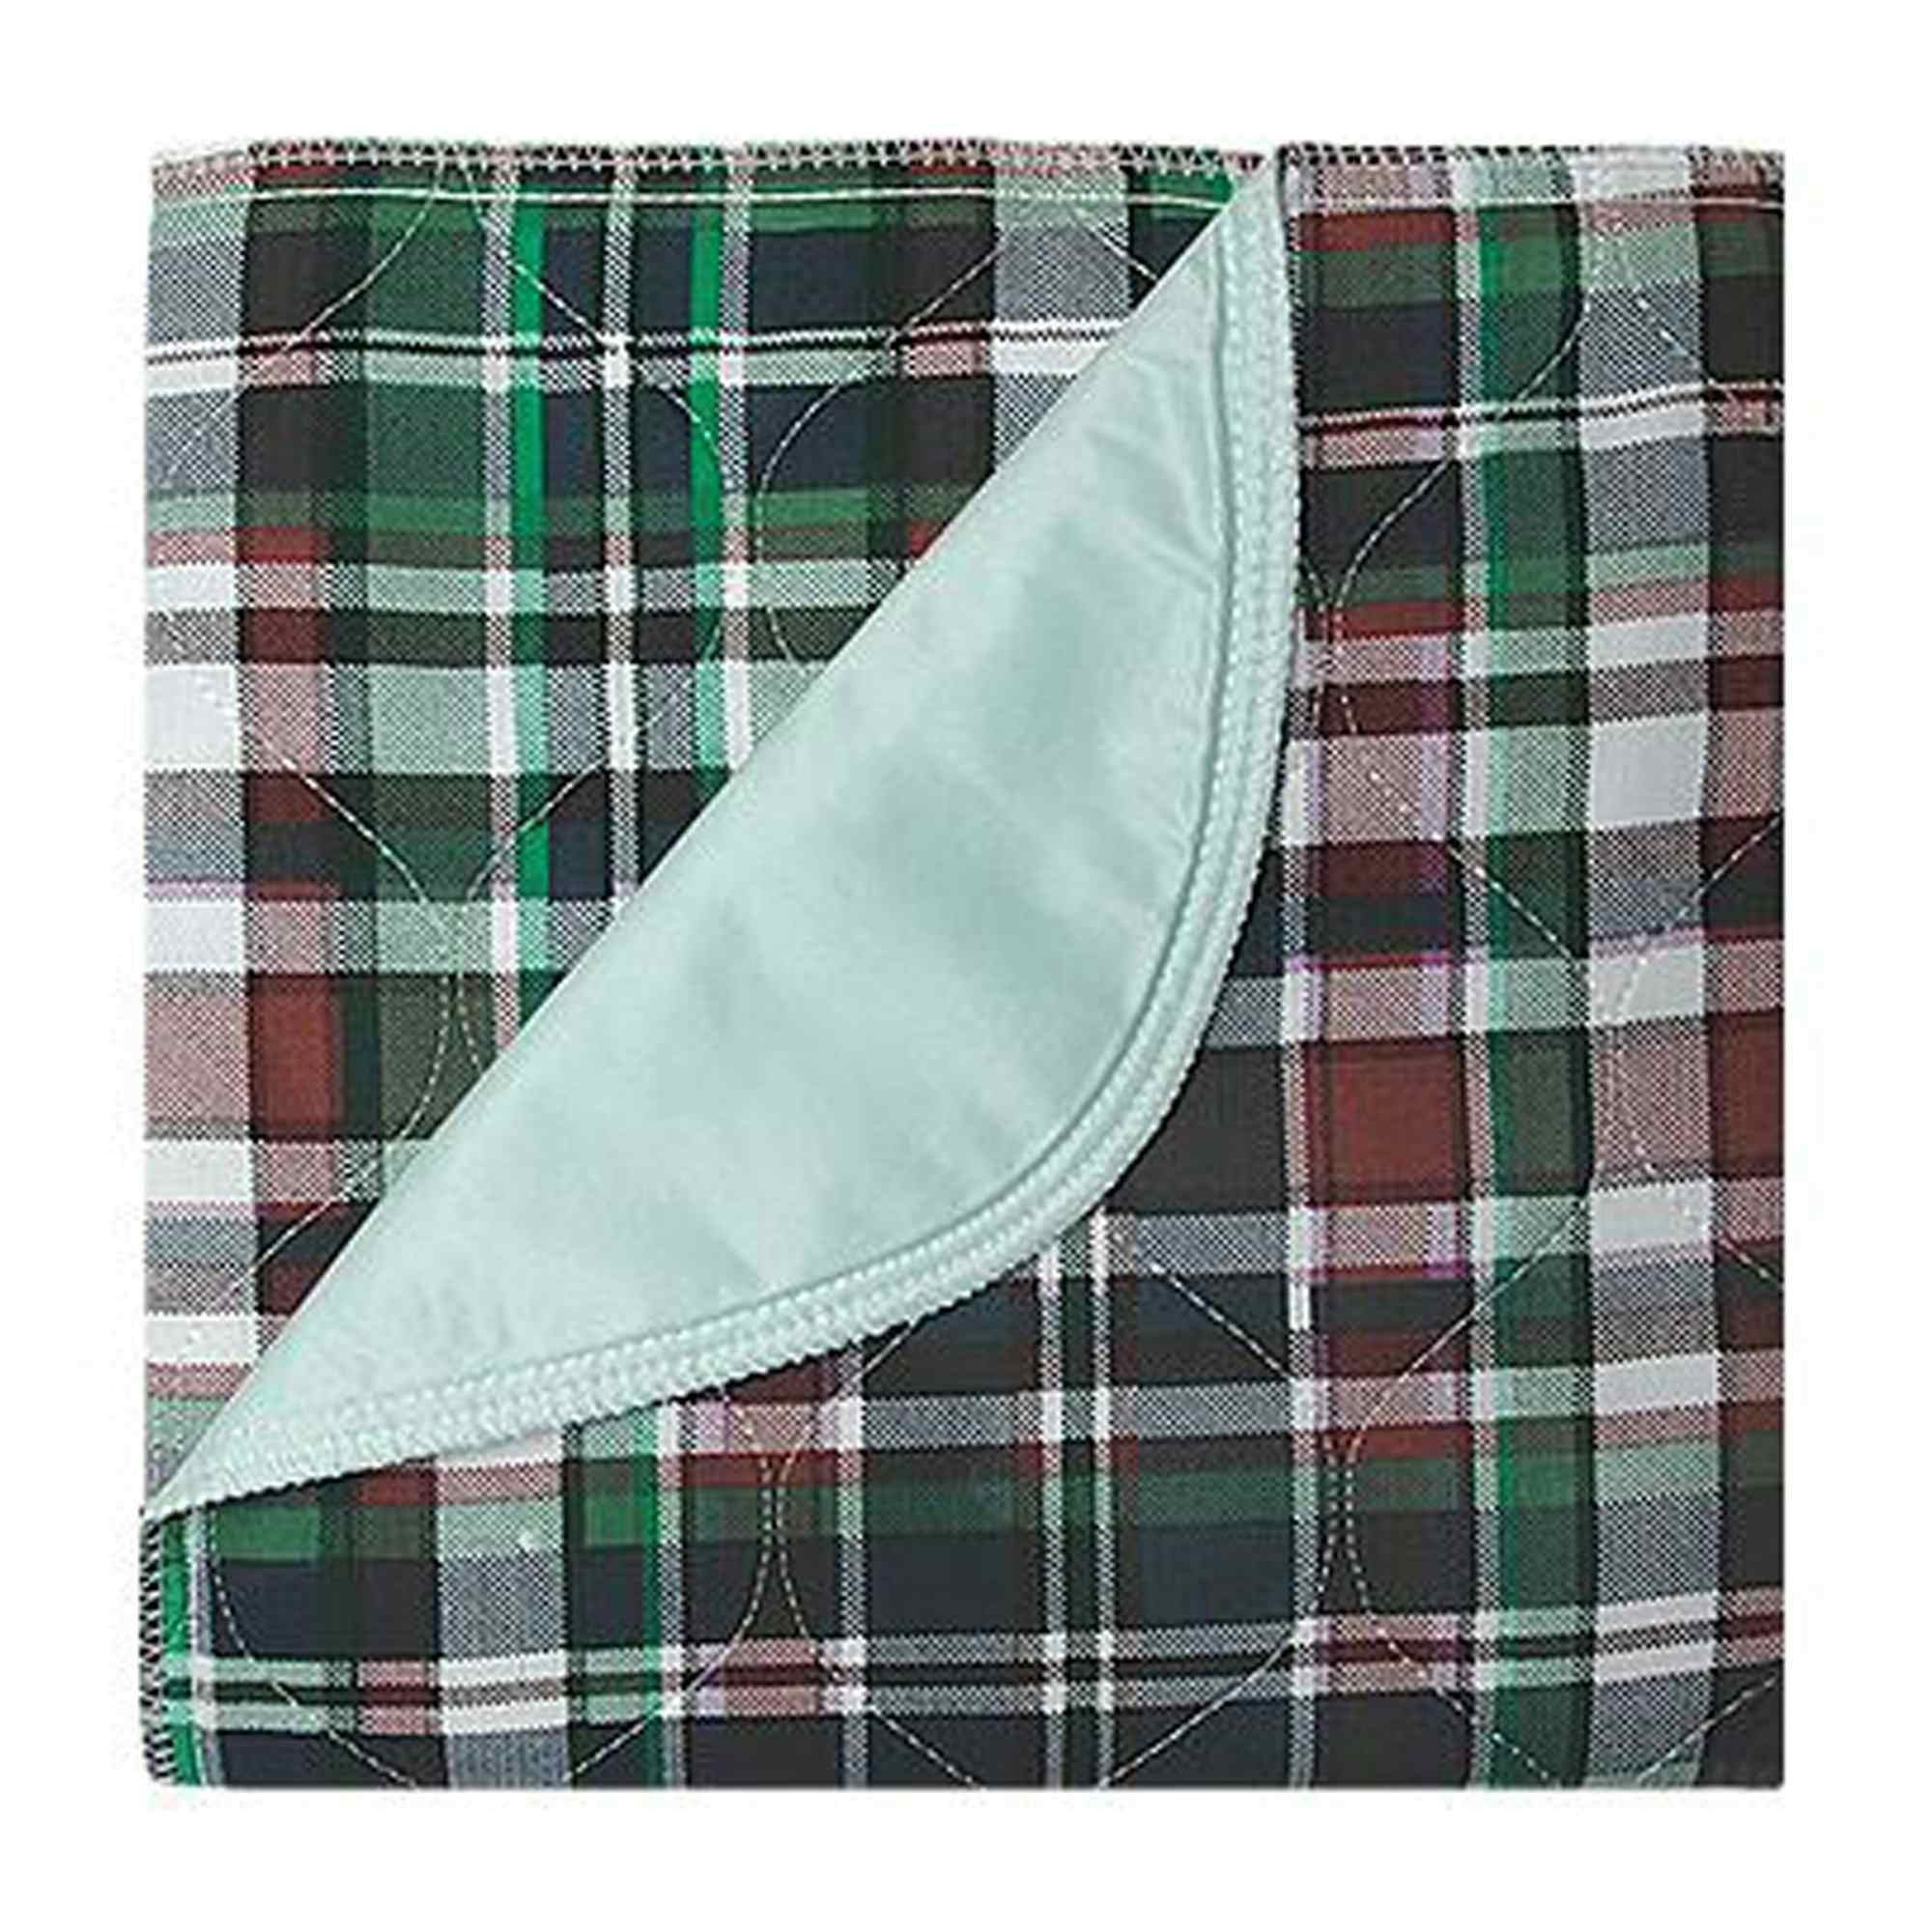 Beck's Classic Plaid Reusable Underpad, Moderate Absorbency, Blue Backsheet